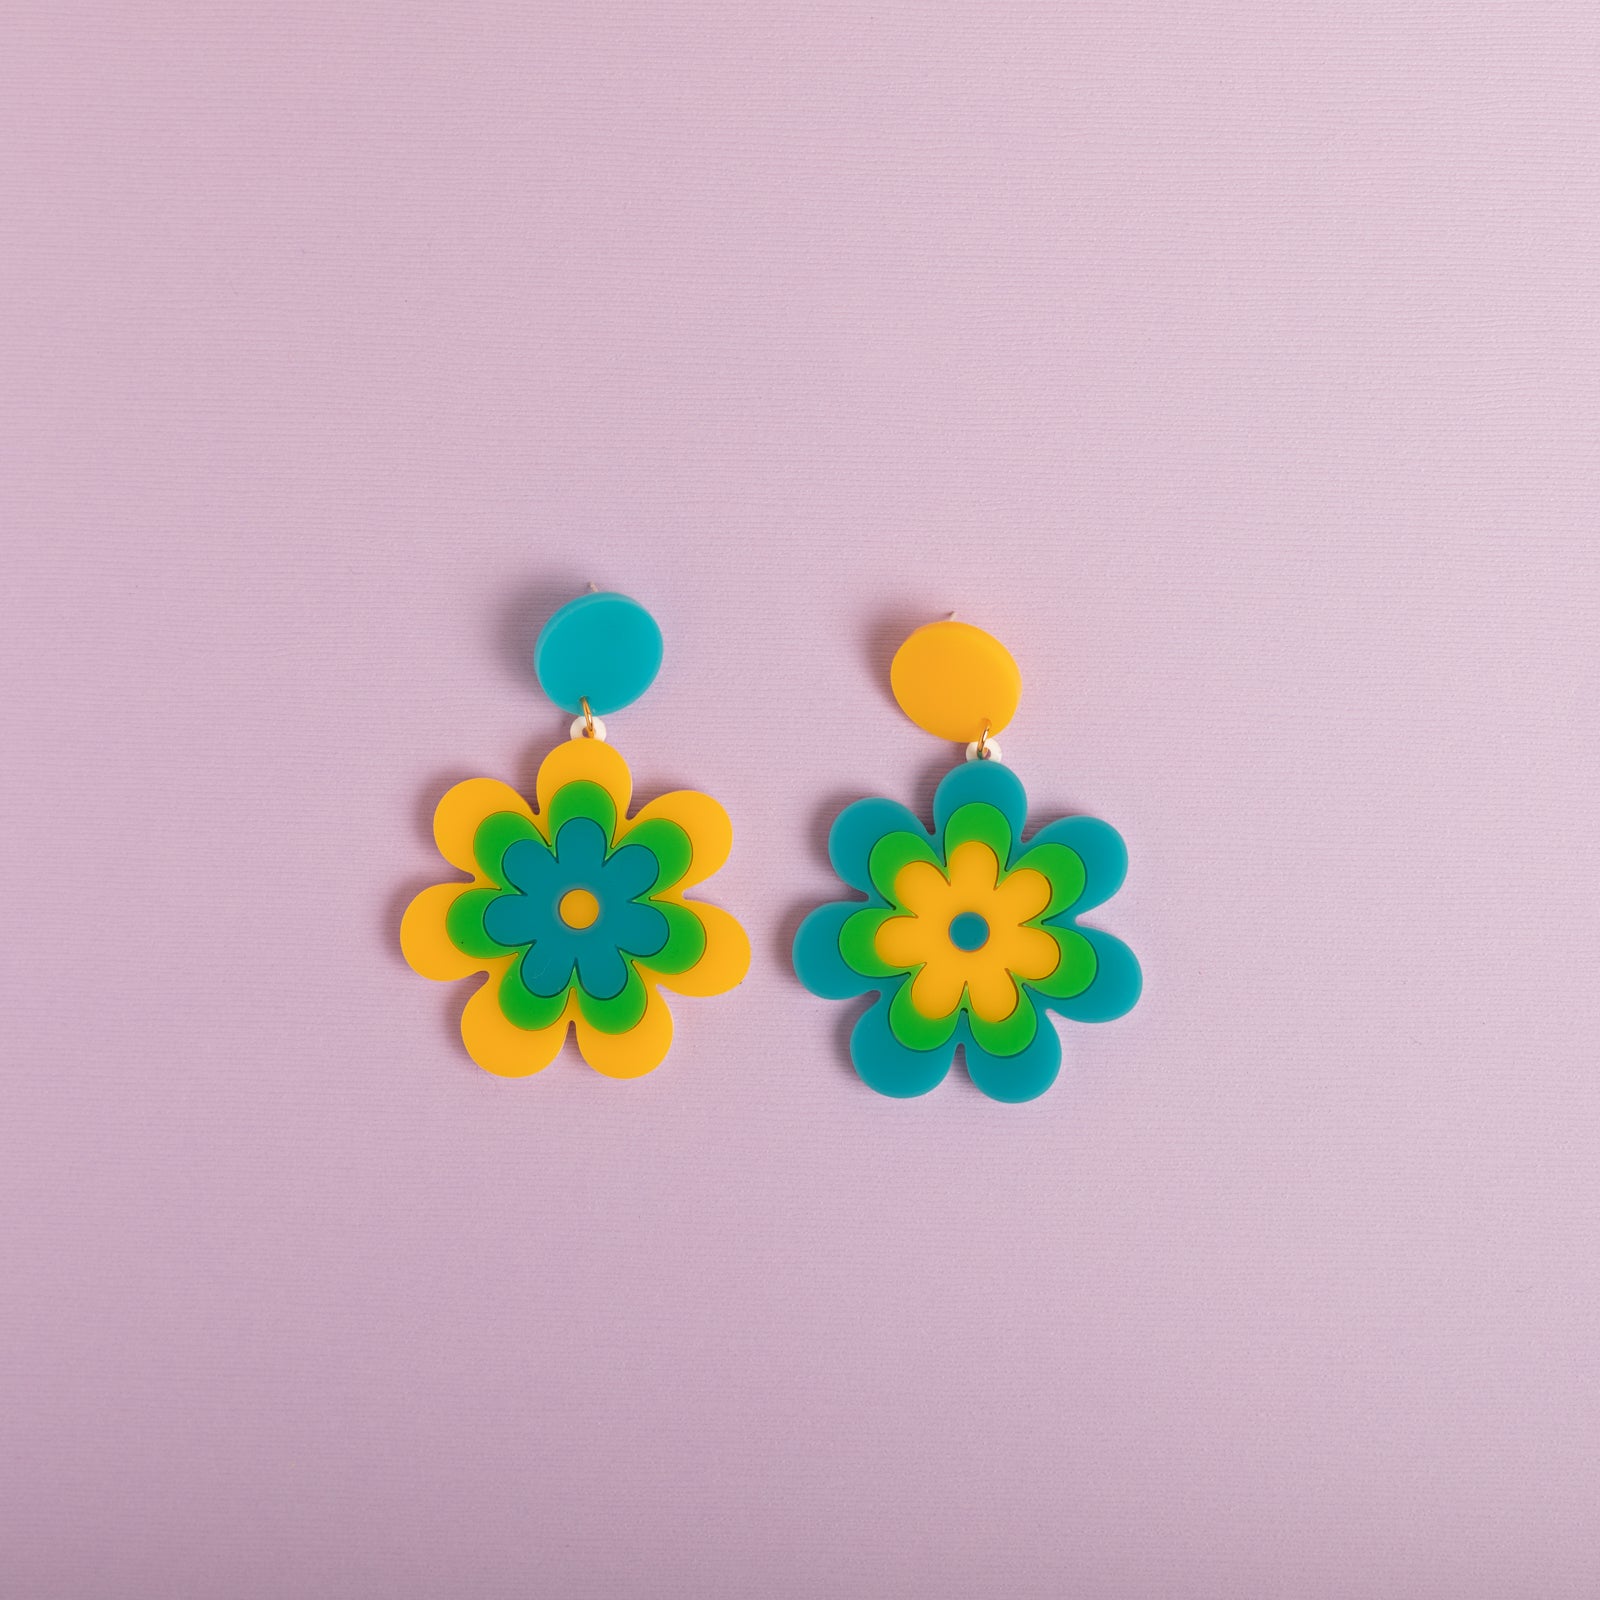 The Candy Daisy Hanging Stud Earrings